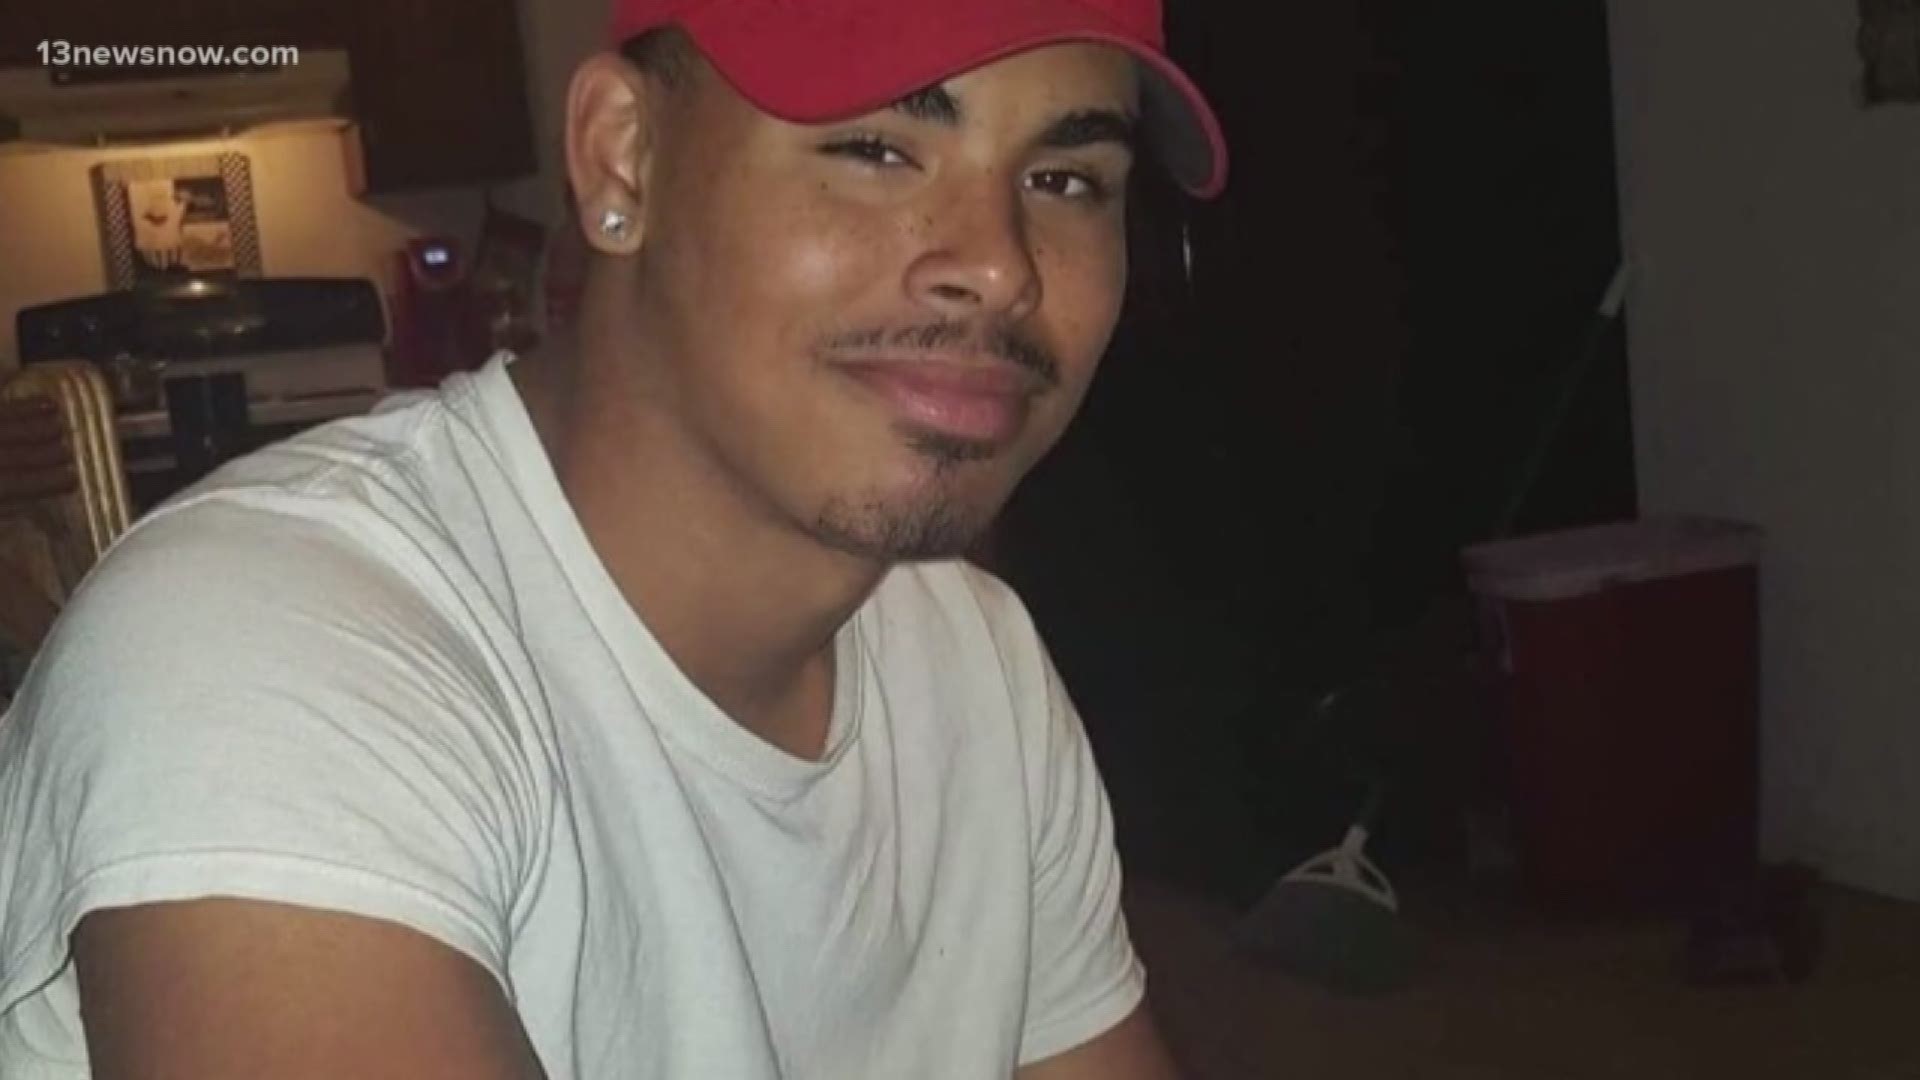 Kemonte Smith and three others were arrested after Elijah Baker was shot to death following a fight outside a party in Middlesex County. One person is still on the run.